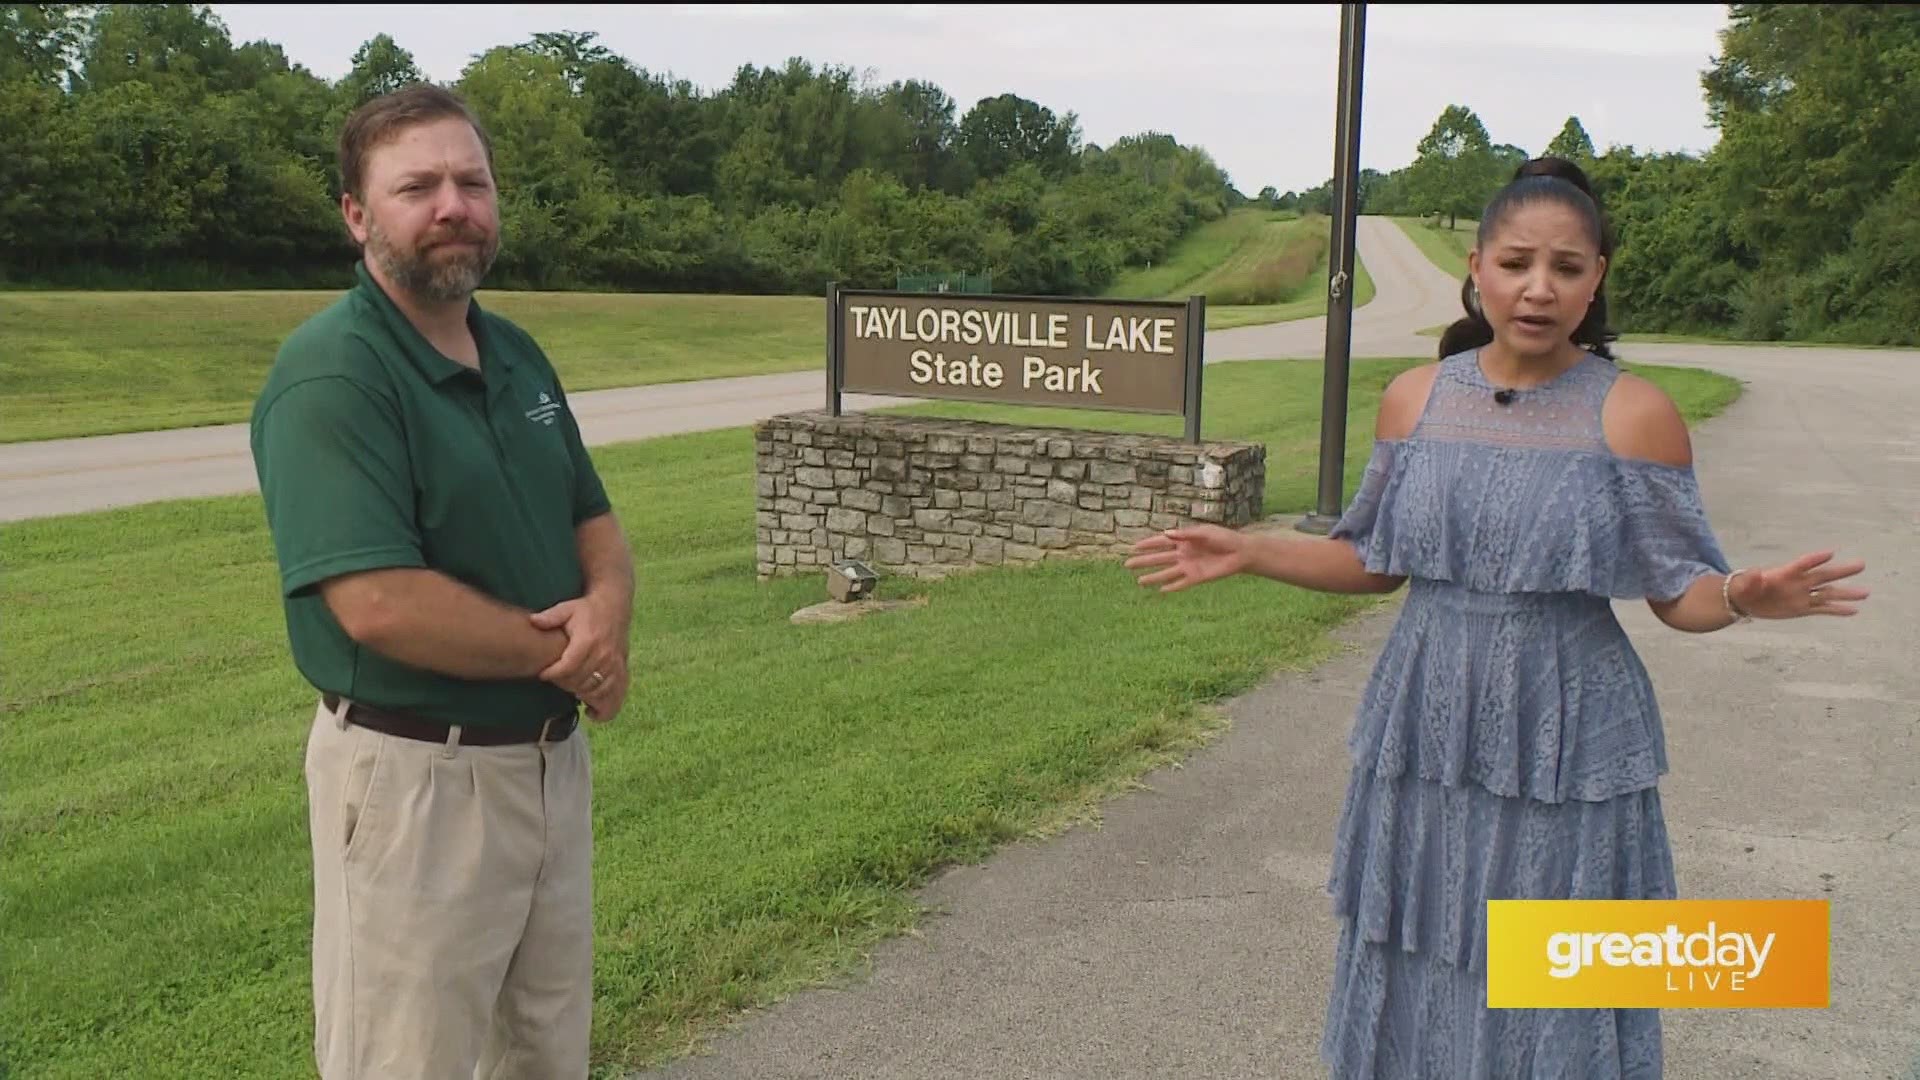 Taylorsville Lake State Park is located at 1320 Park Rd. in Mt. Eden, KY.